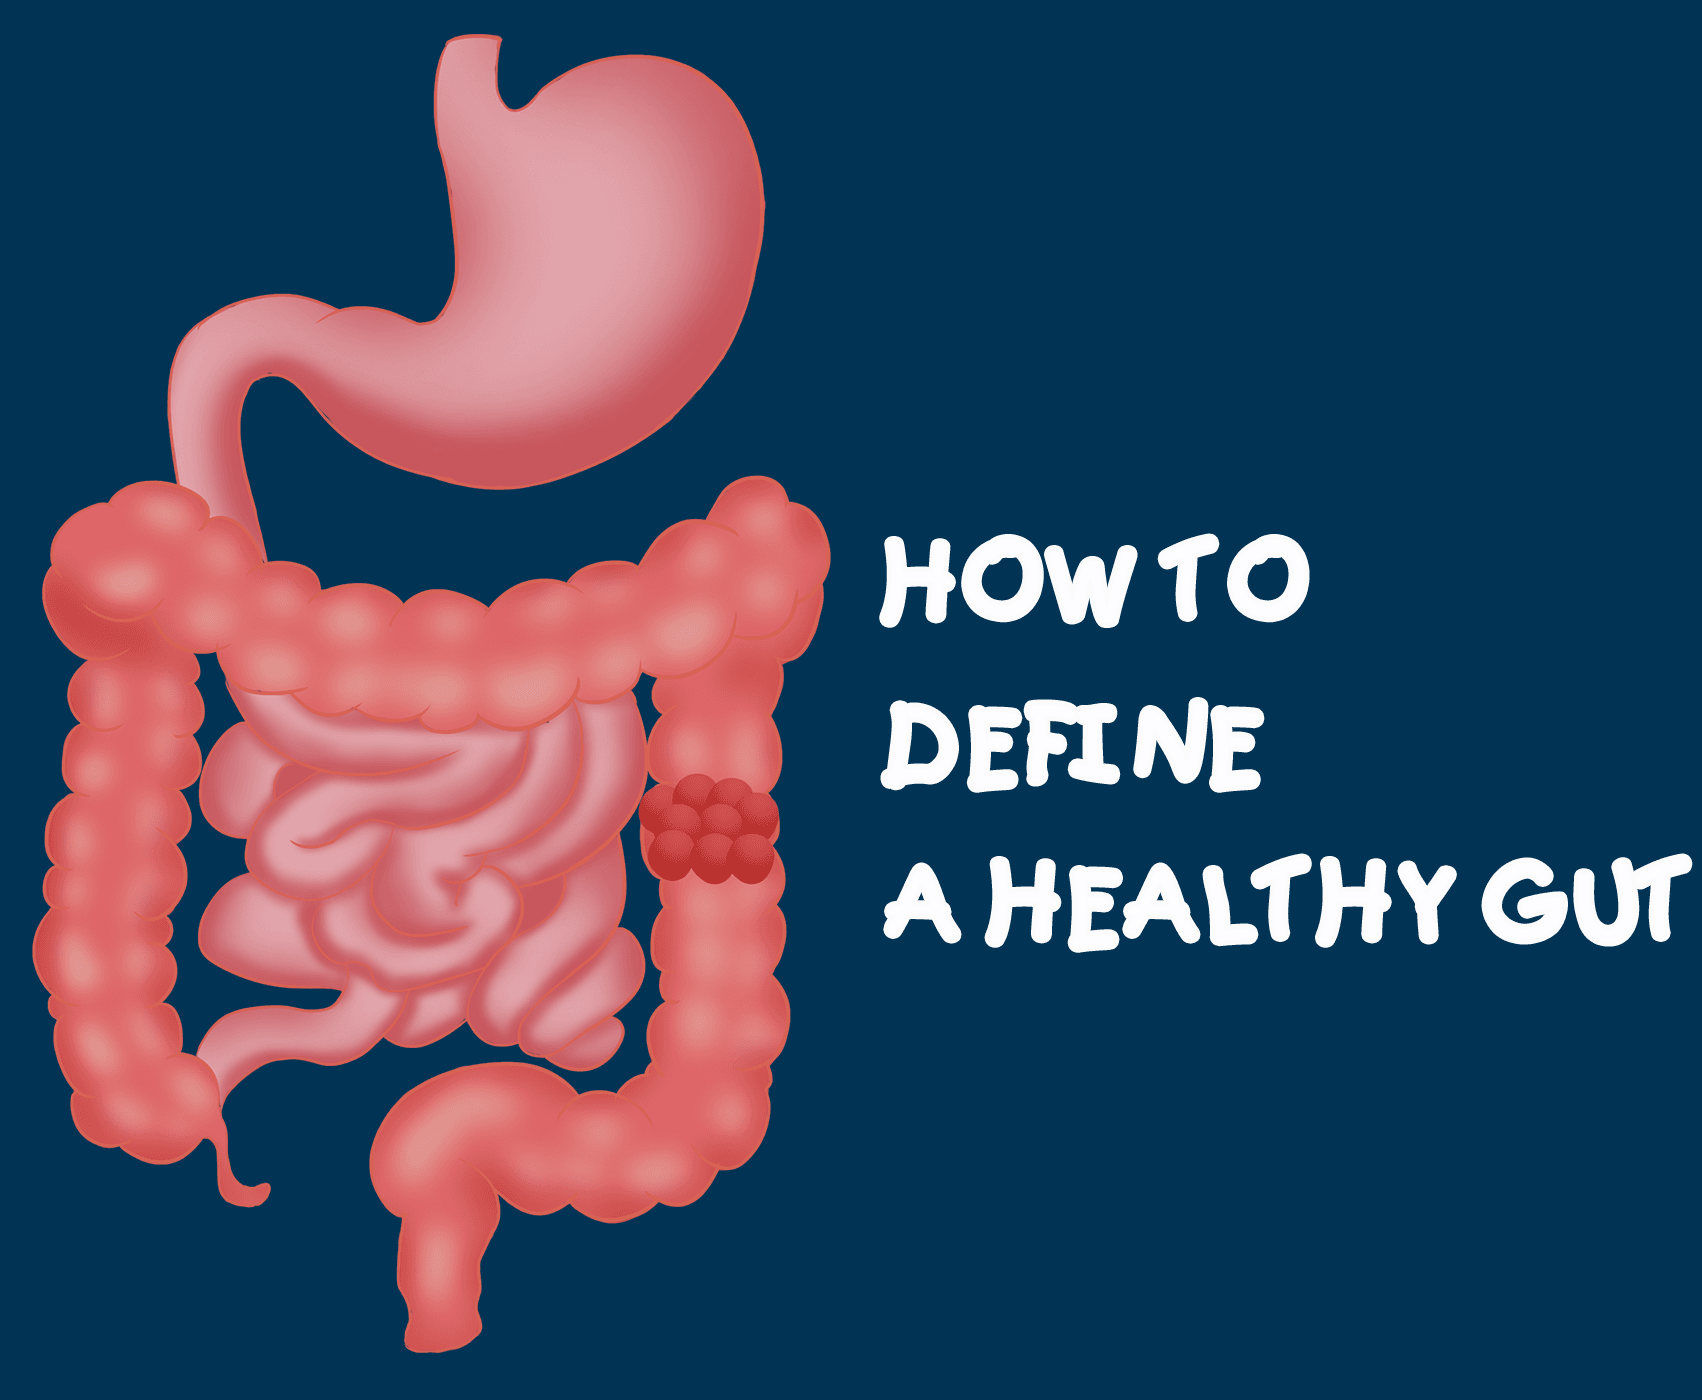 How to Define a Healthy Gut